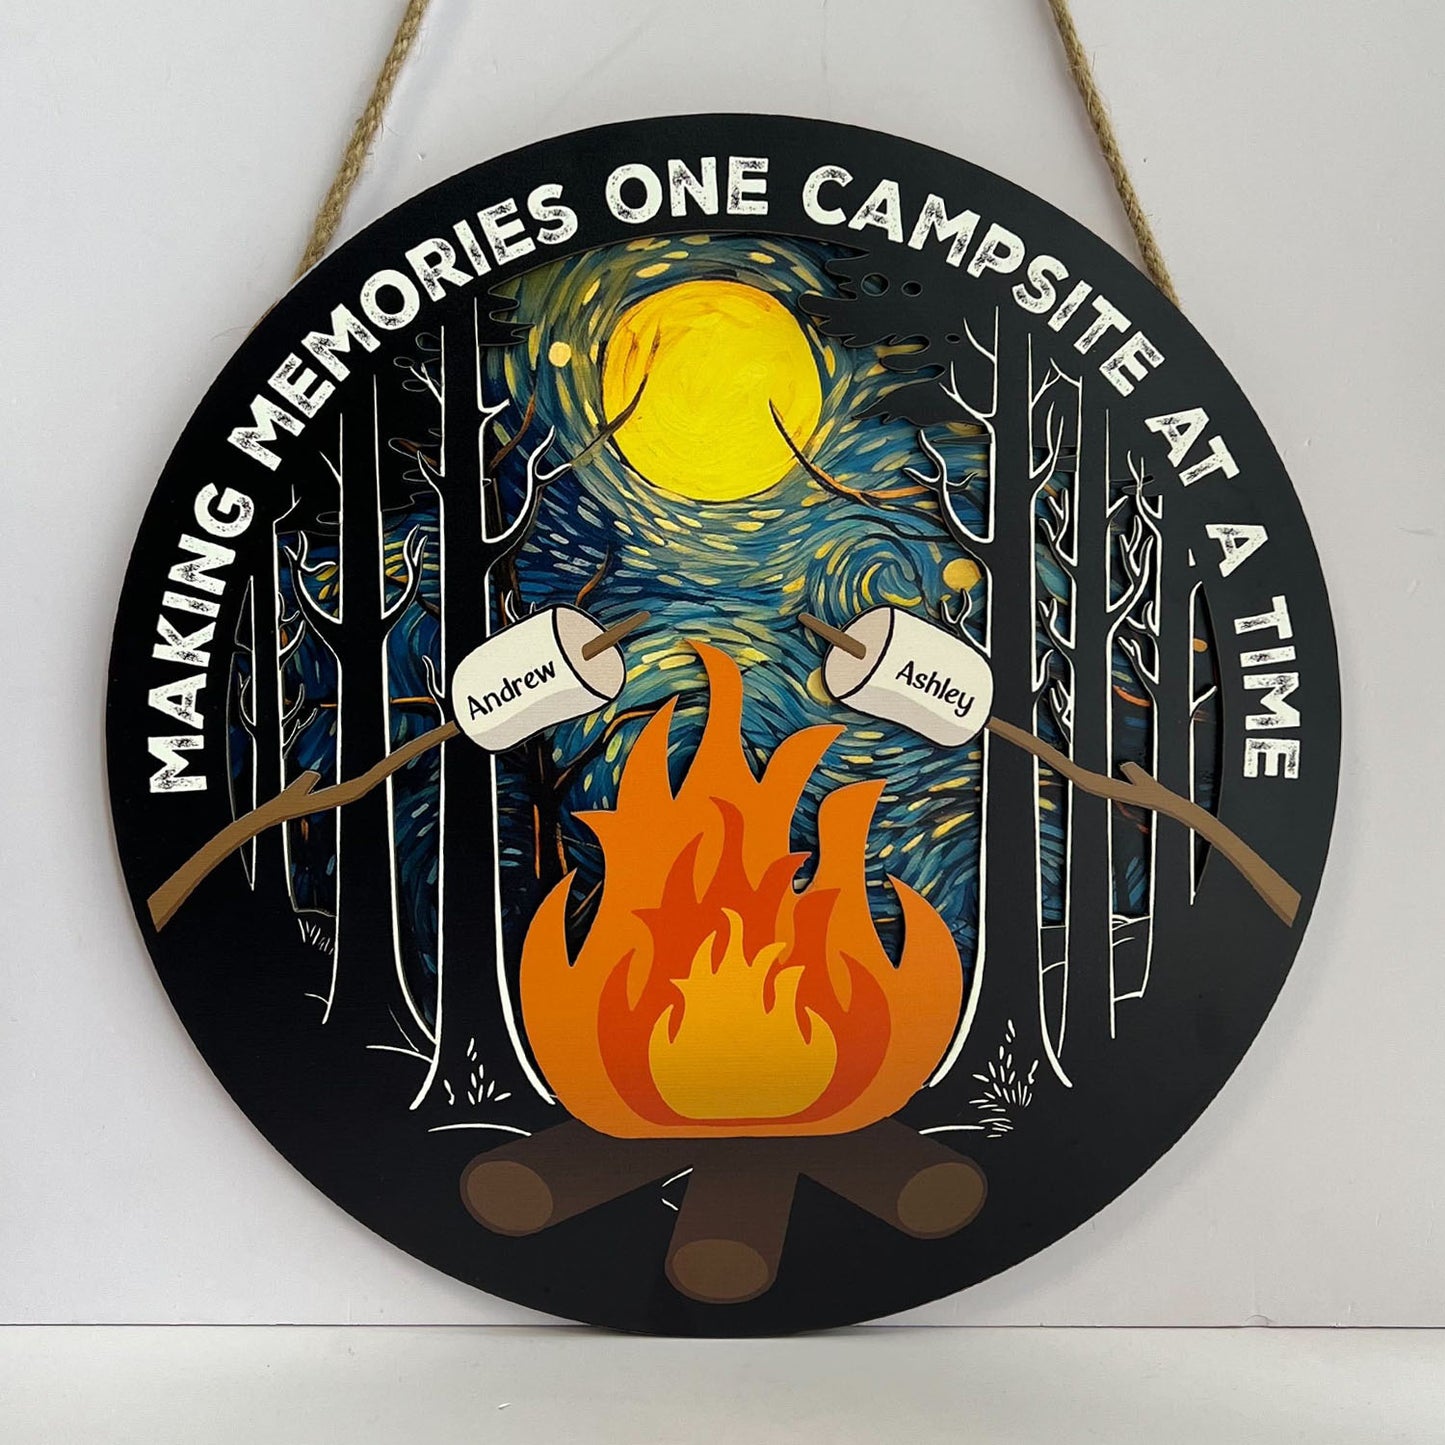 Making Memories One Campsite At A Time - Personalized 2 Layers Wood Sign